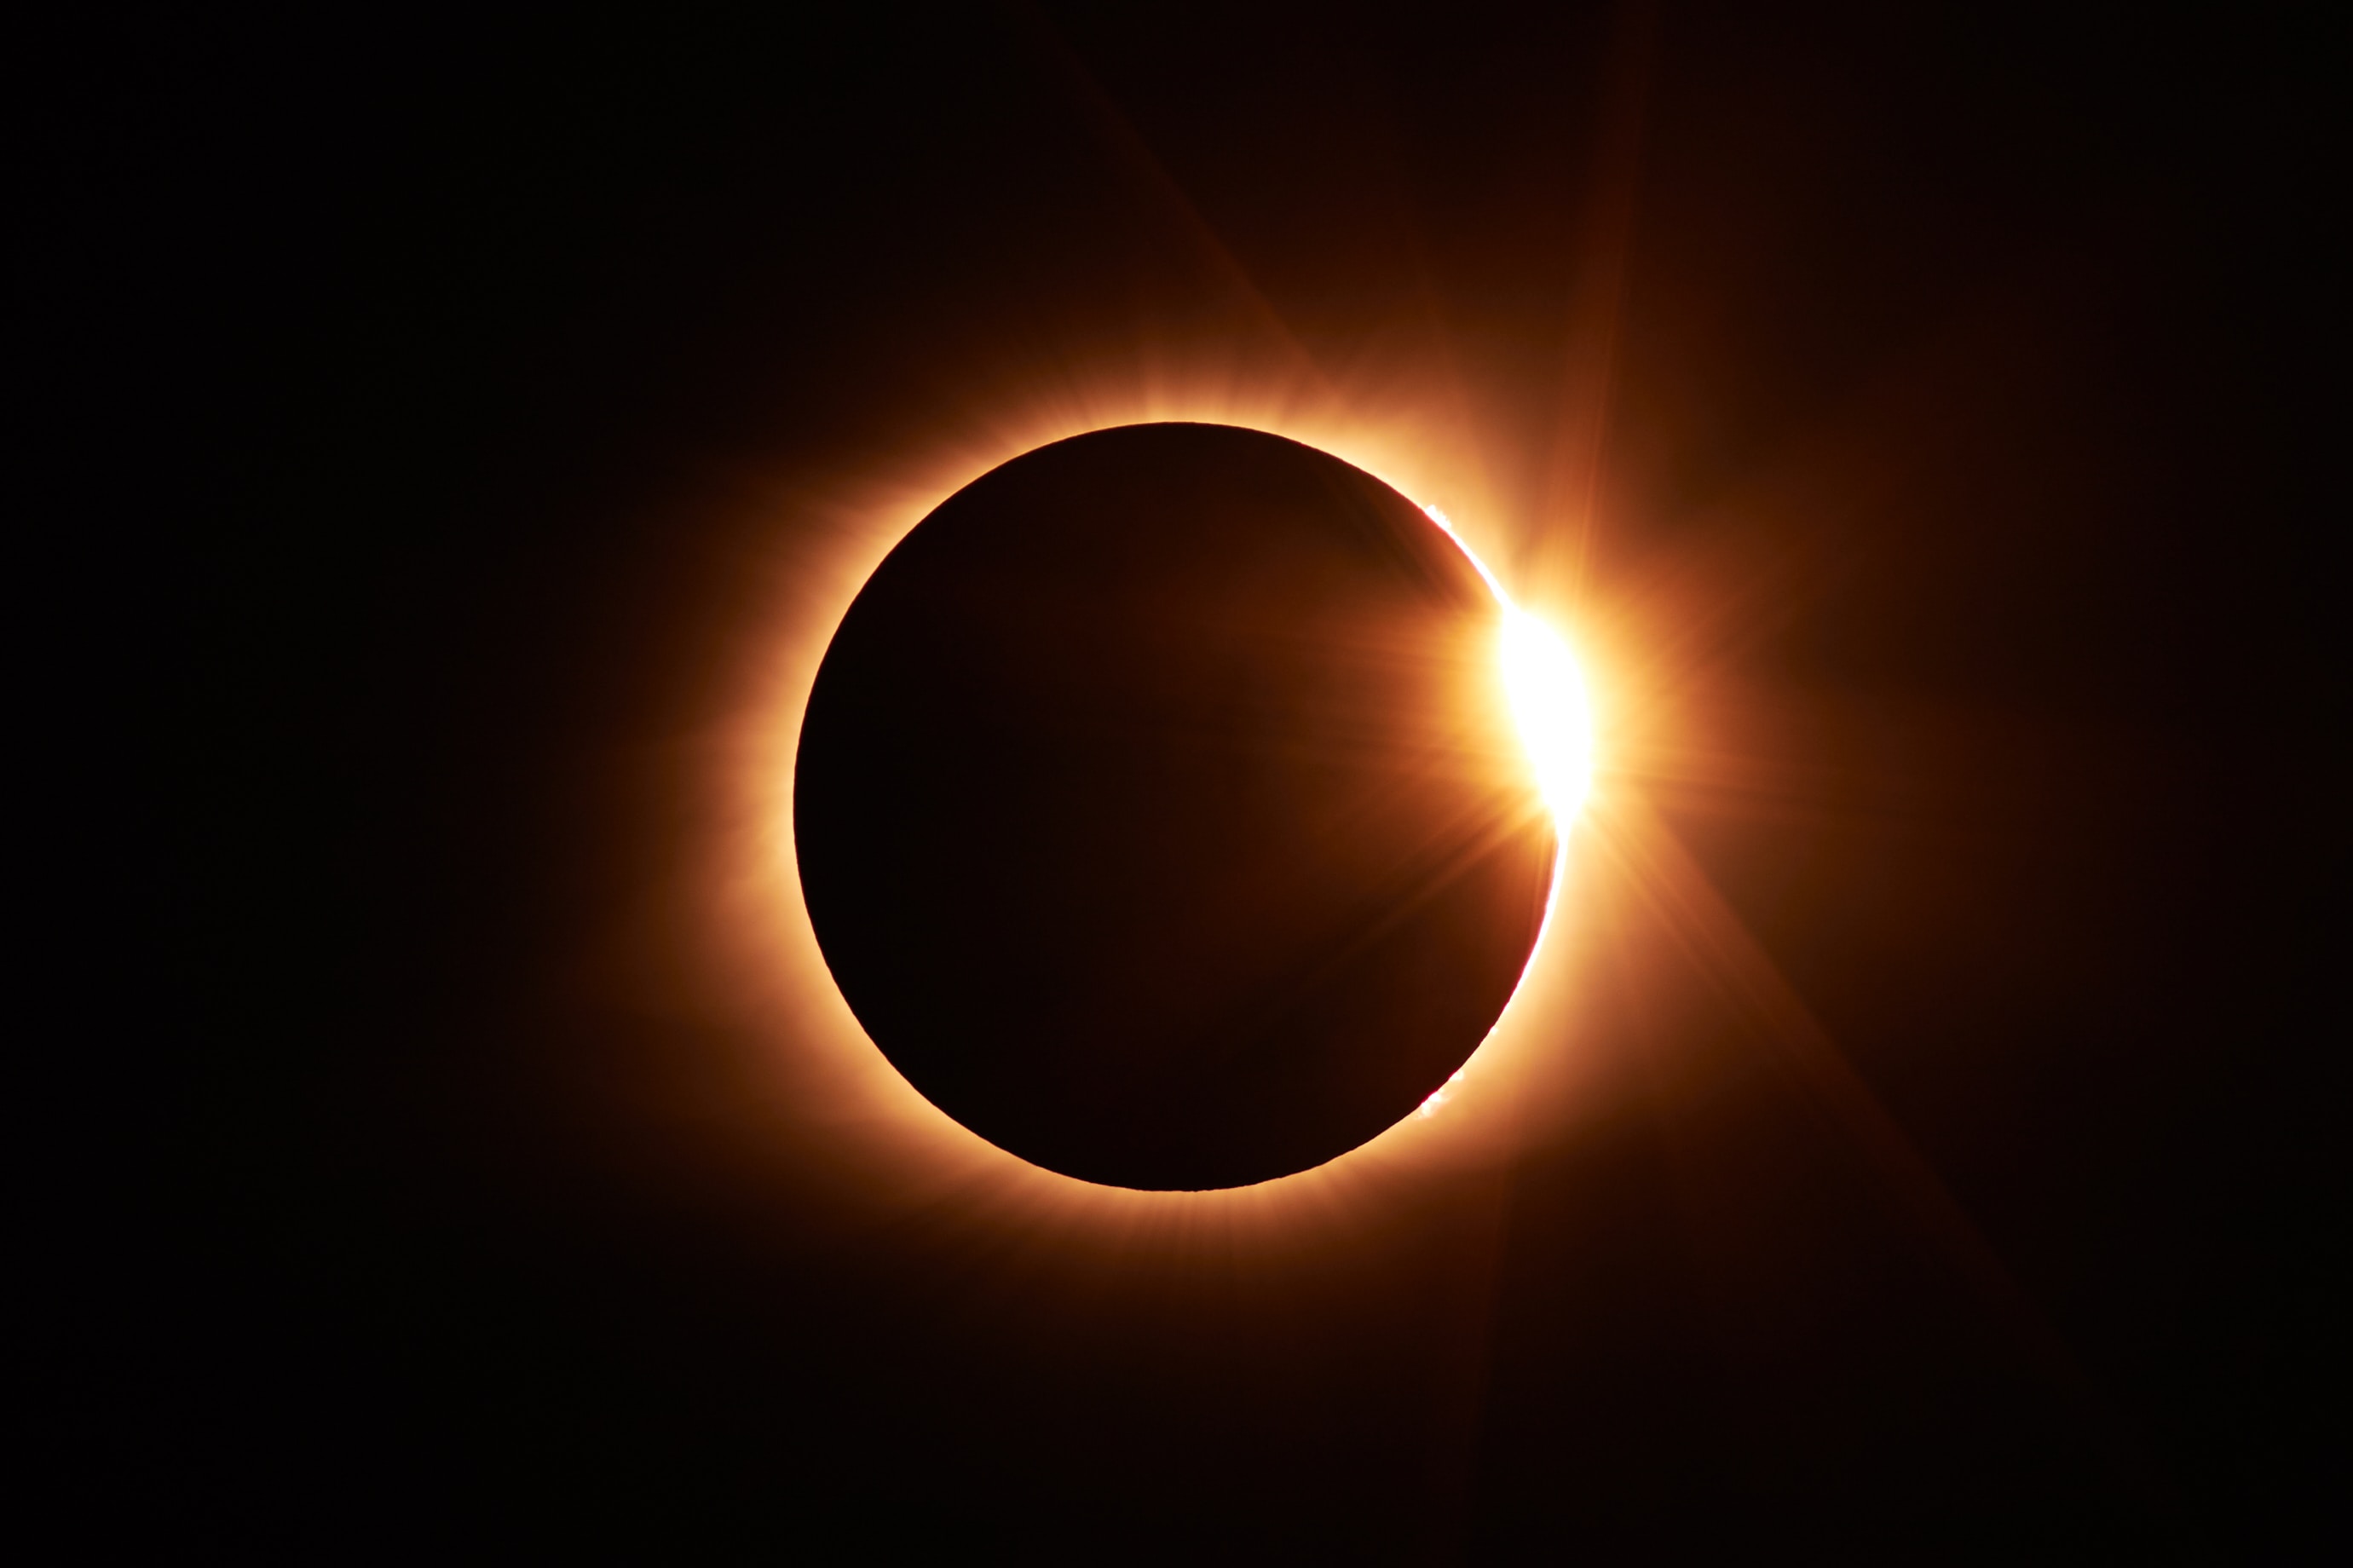 Smartphone troubleshooting: can you use your phone during an eclipse?